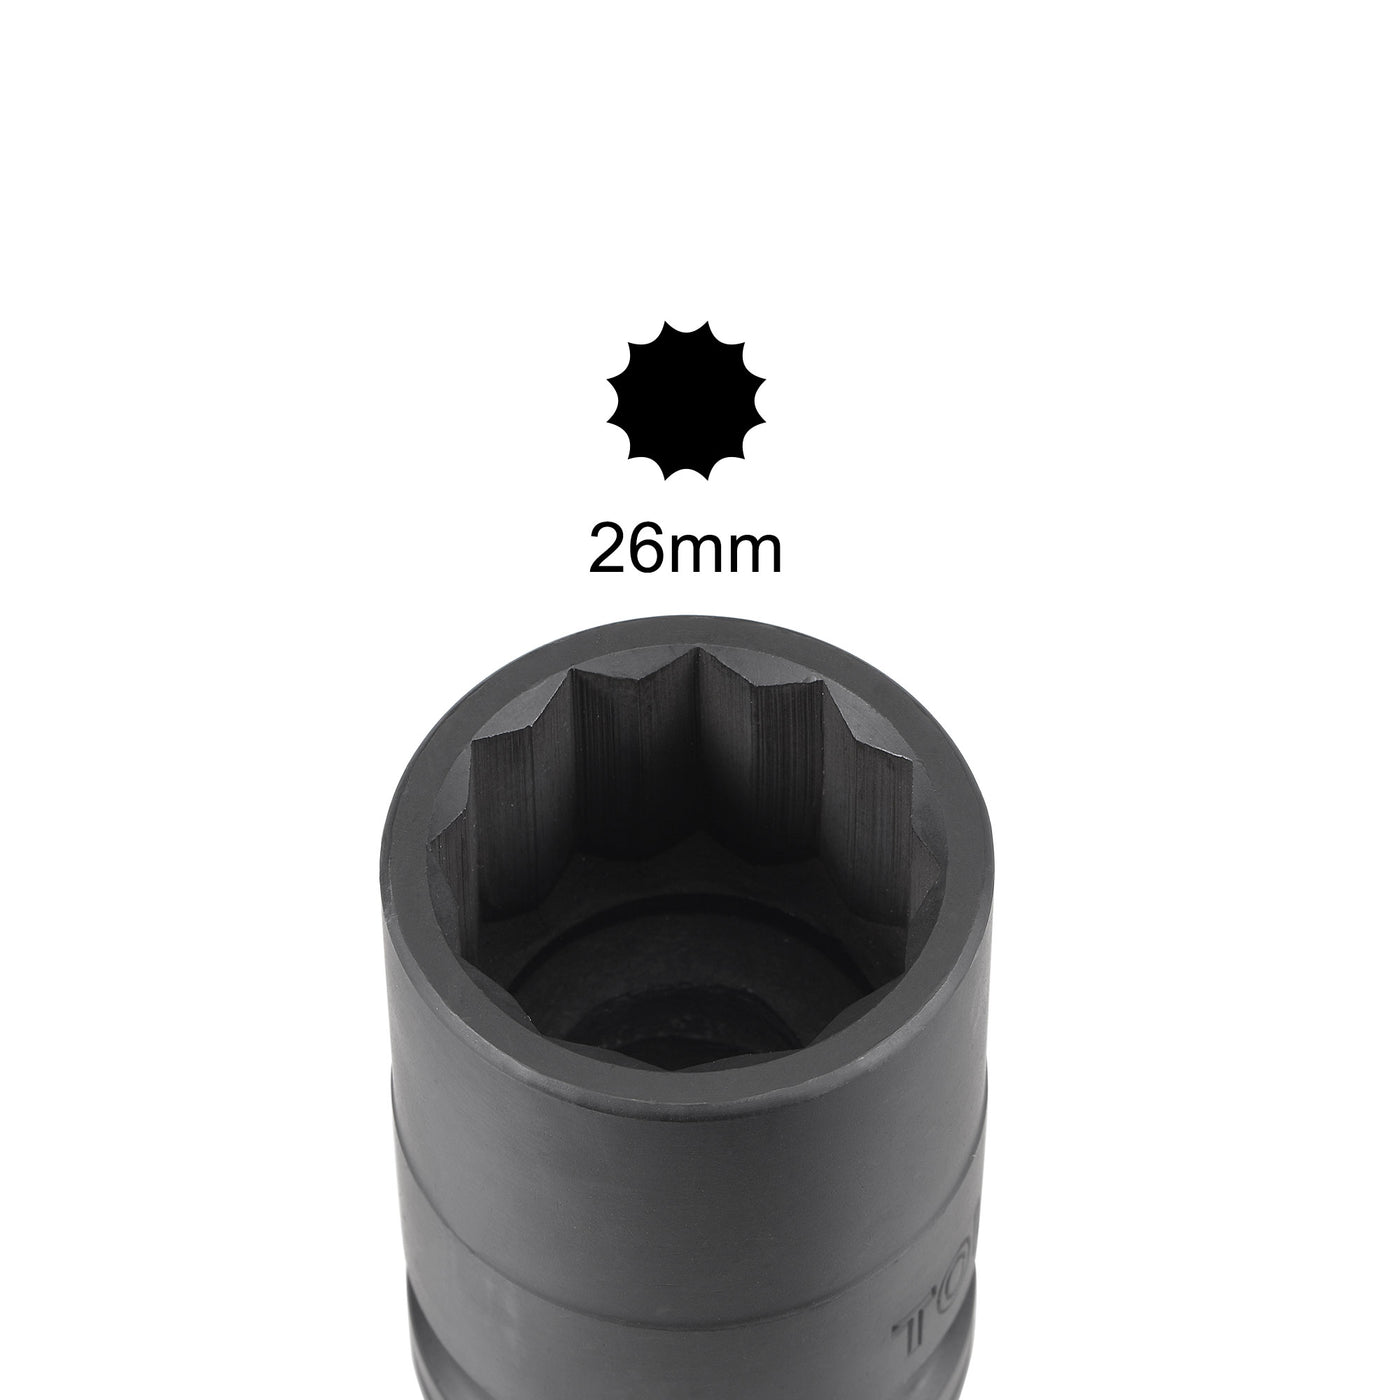 uxcell Uxcell 3/4" Drive 26mm 12-Point Impact Socket, CR-MO Steel 56mm Length, Standard Metric